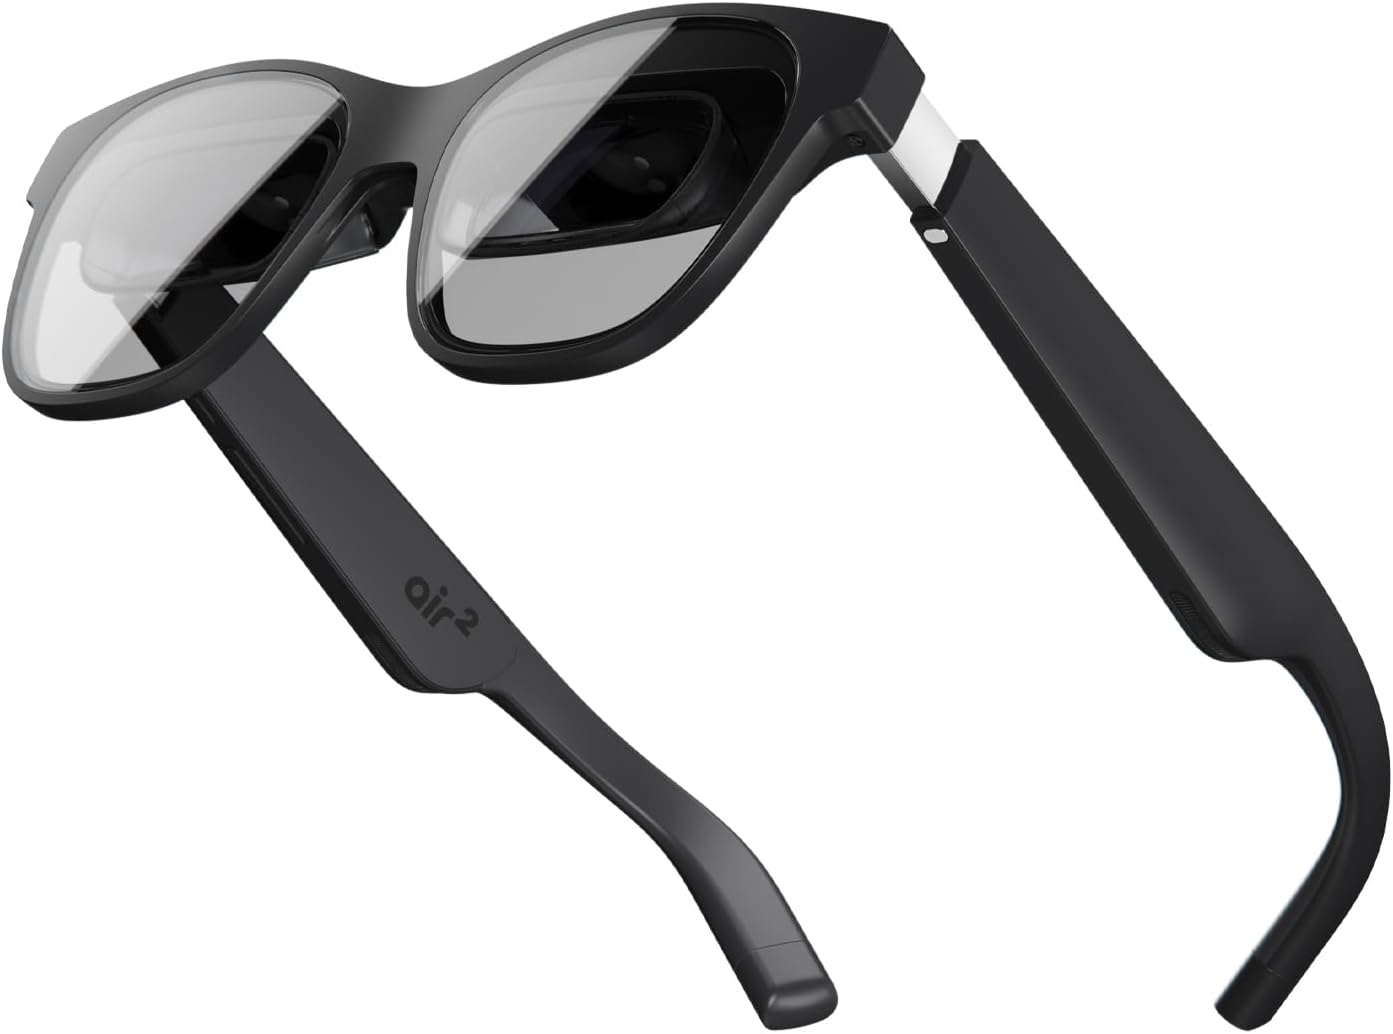 The Unbelievable Futuristic XREAL Air 2 AR Glasses